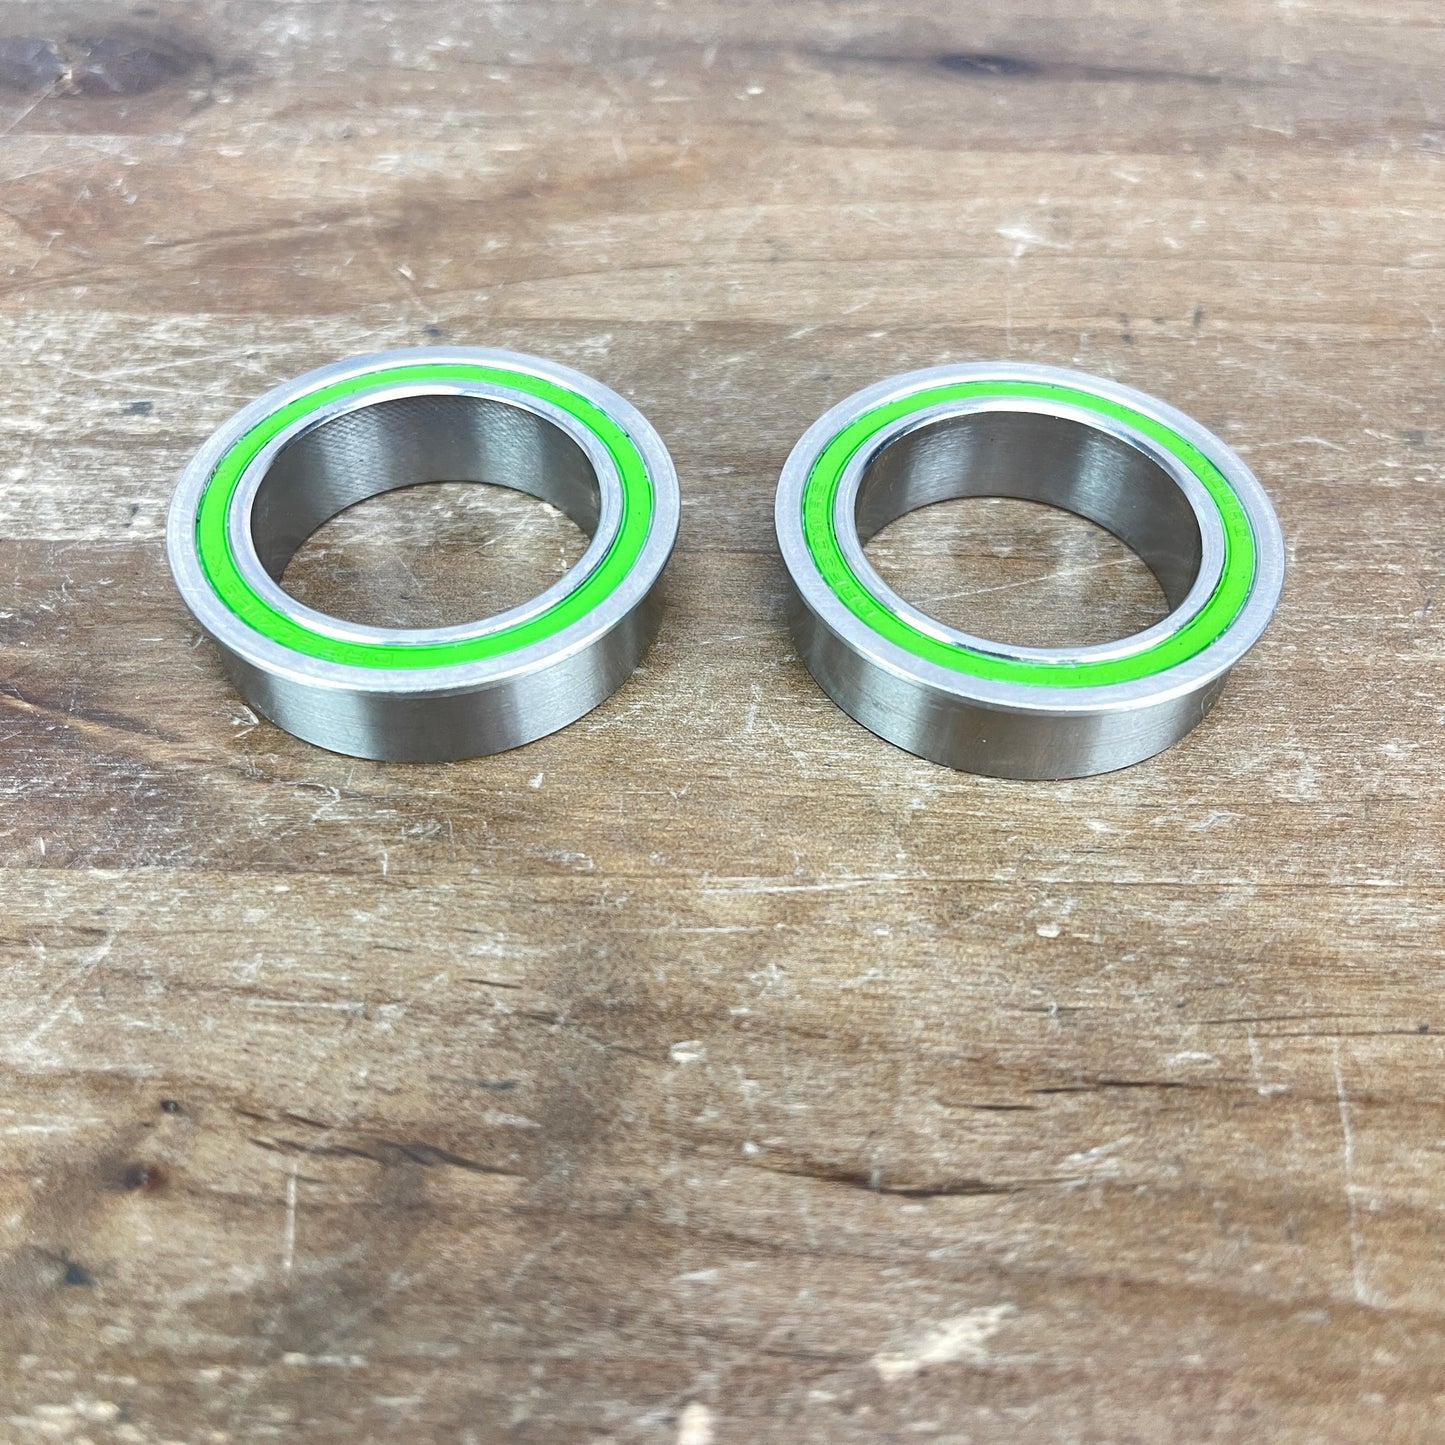 Wheels Manufacturing BB86 for 30mm Spindles Dual Row Bottom Bracket